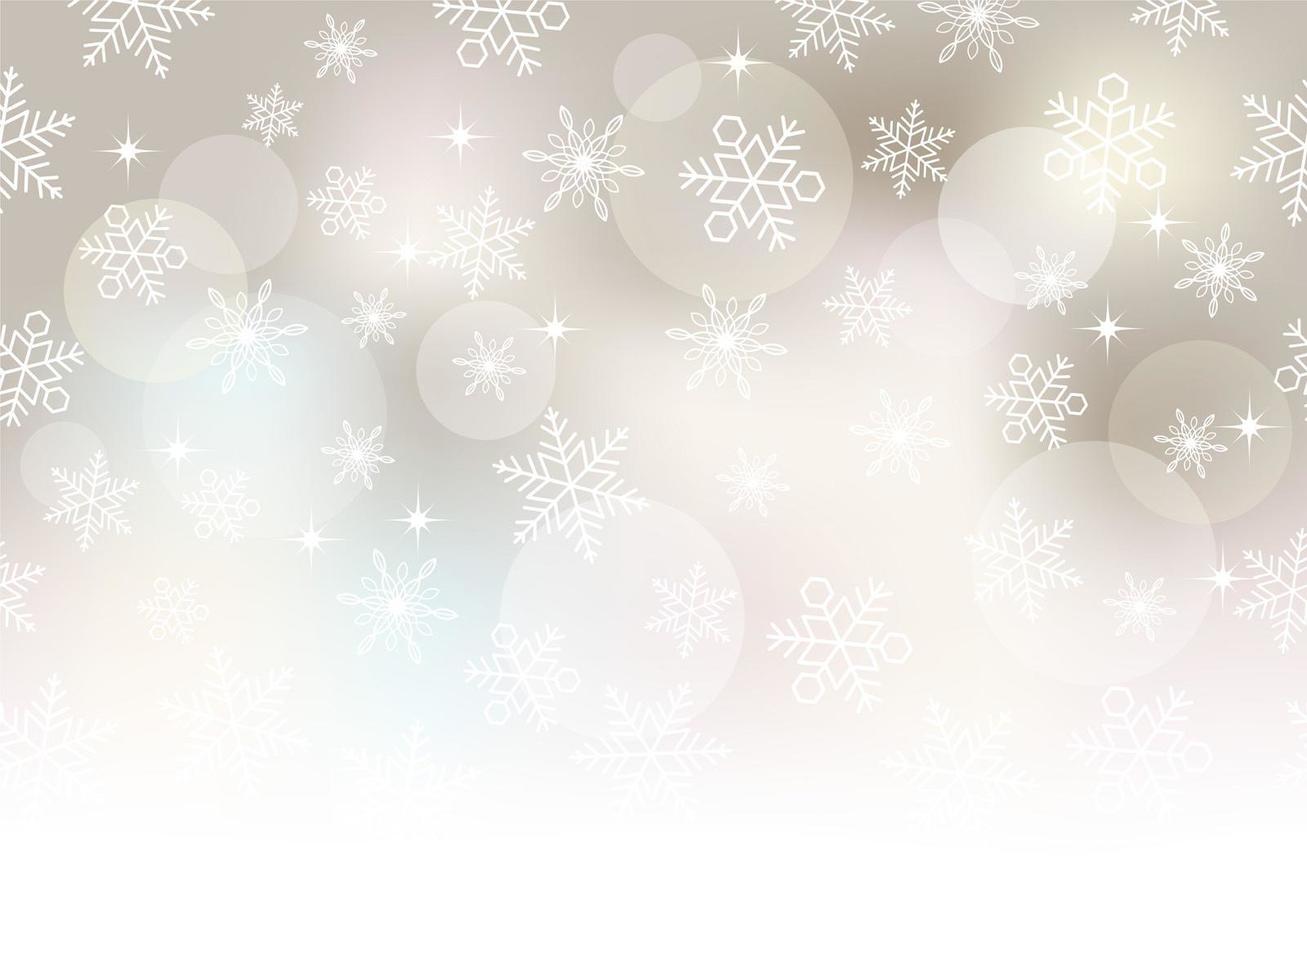 Abstract festive background with snowflakes vector